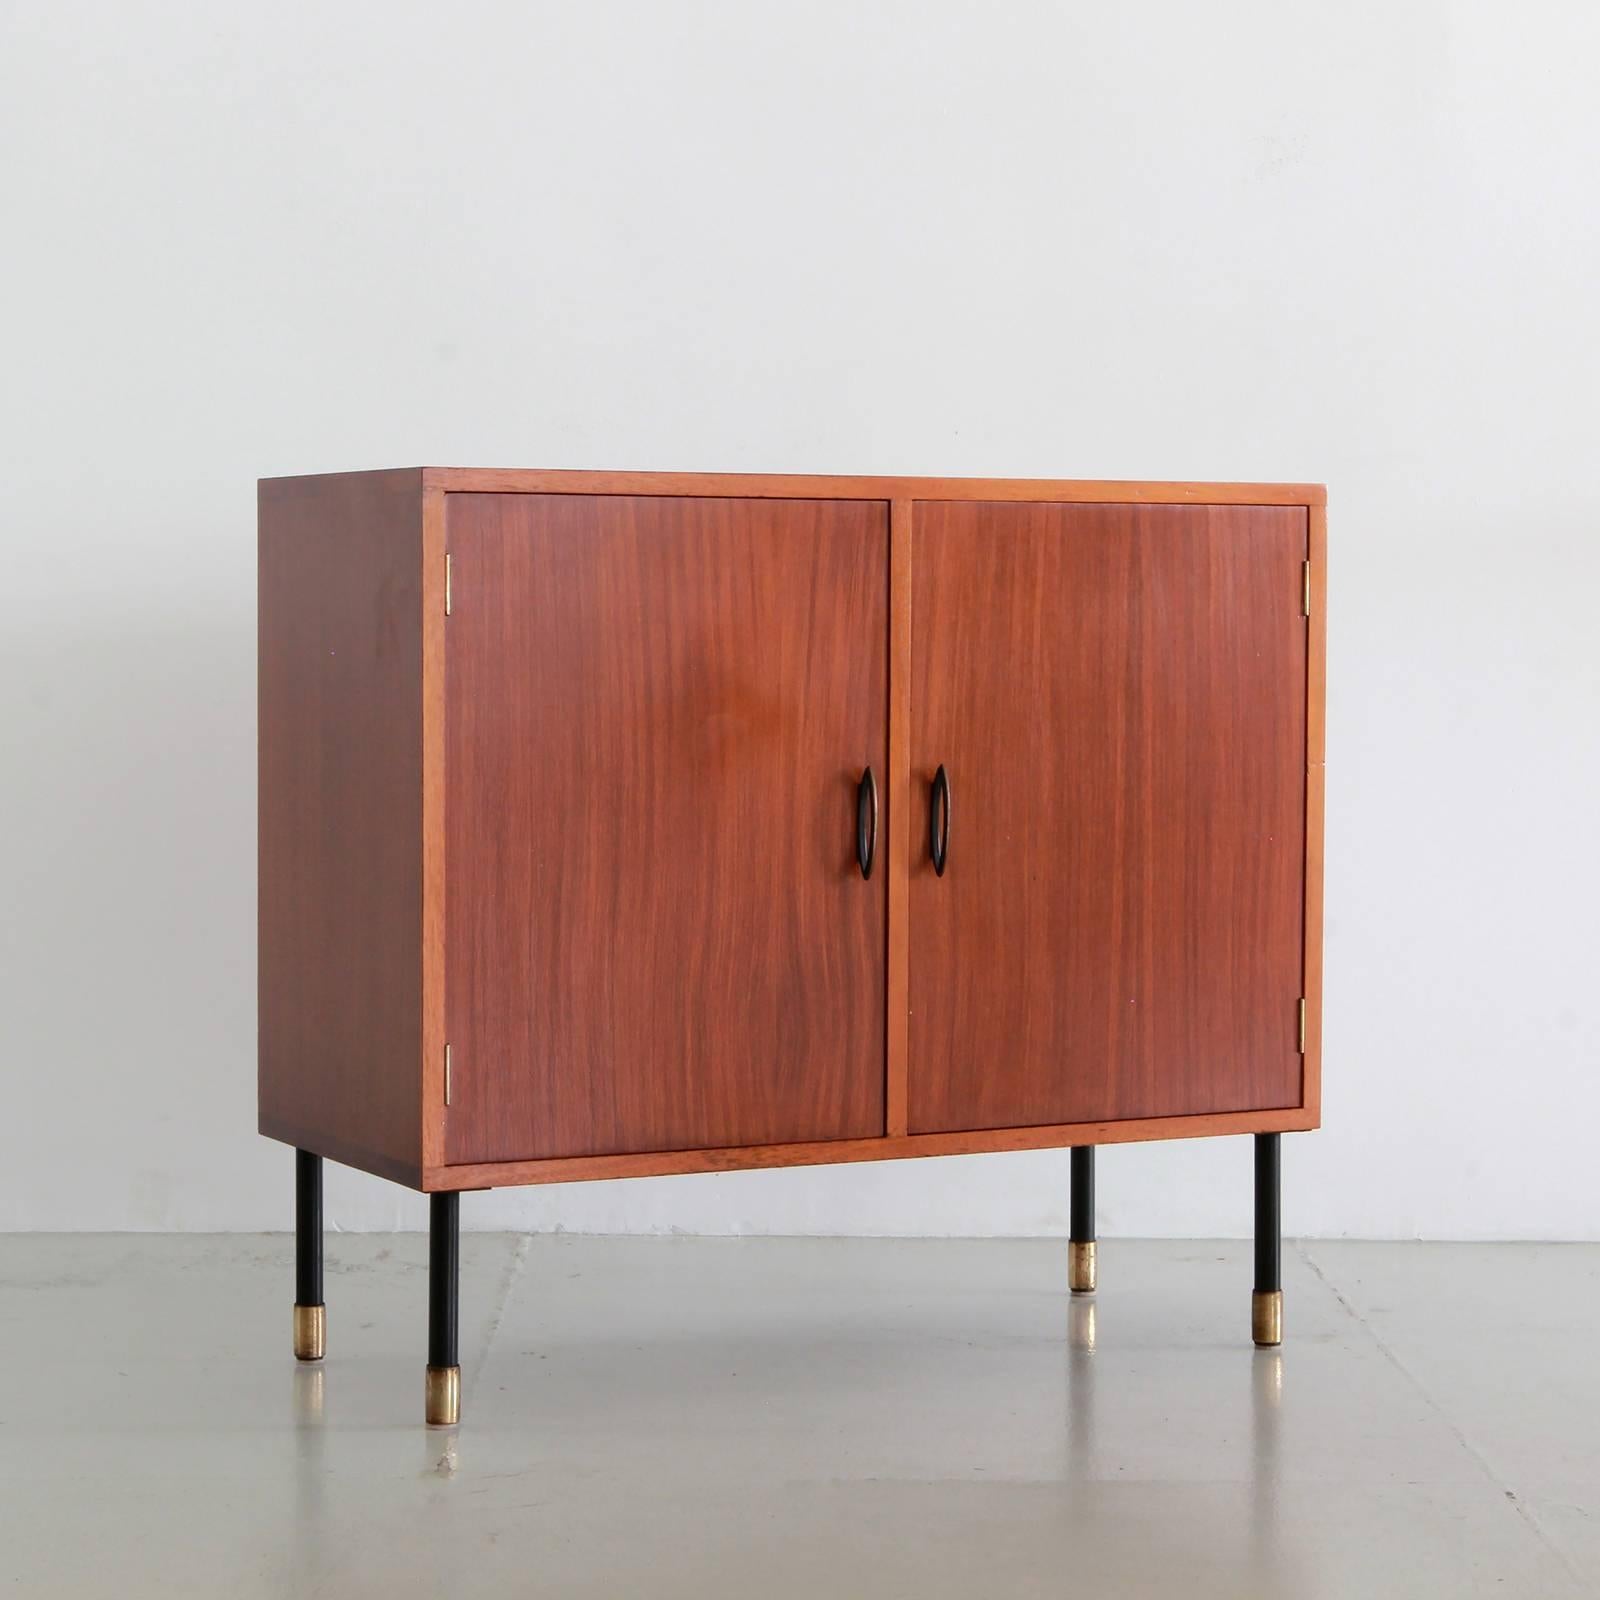 Handsome Italian cabinet by I.S.A Bergamo with open cabinet shelving on both sides. 
Brass hardware on iron legs and brass feet.
Total of three similar cabinets available.